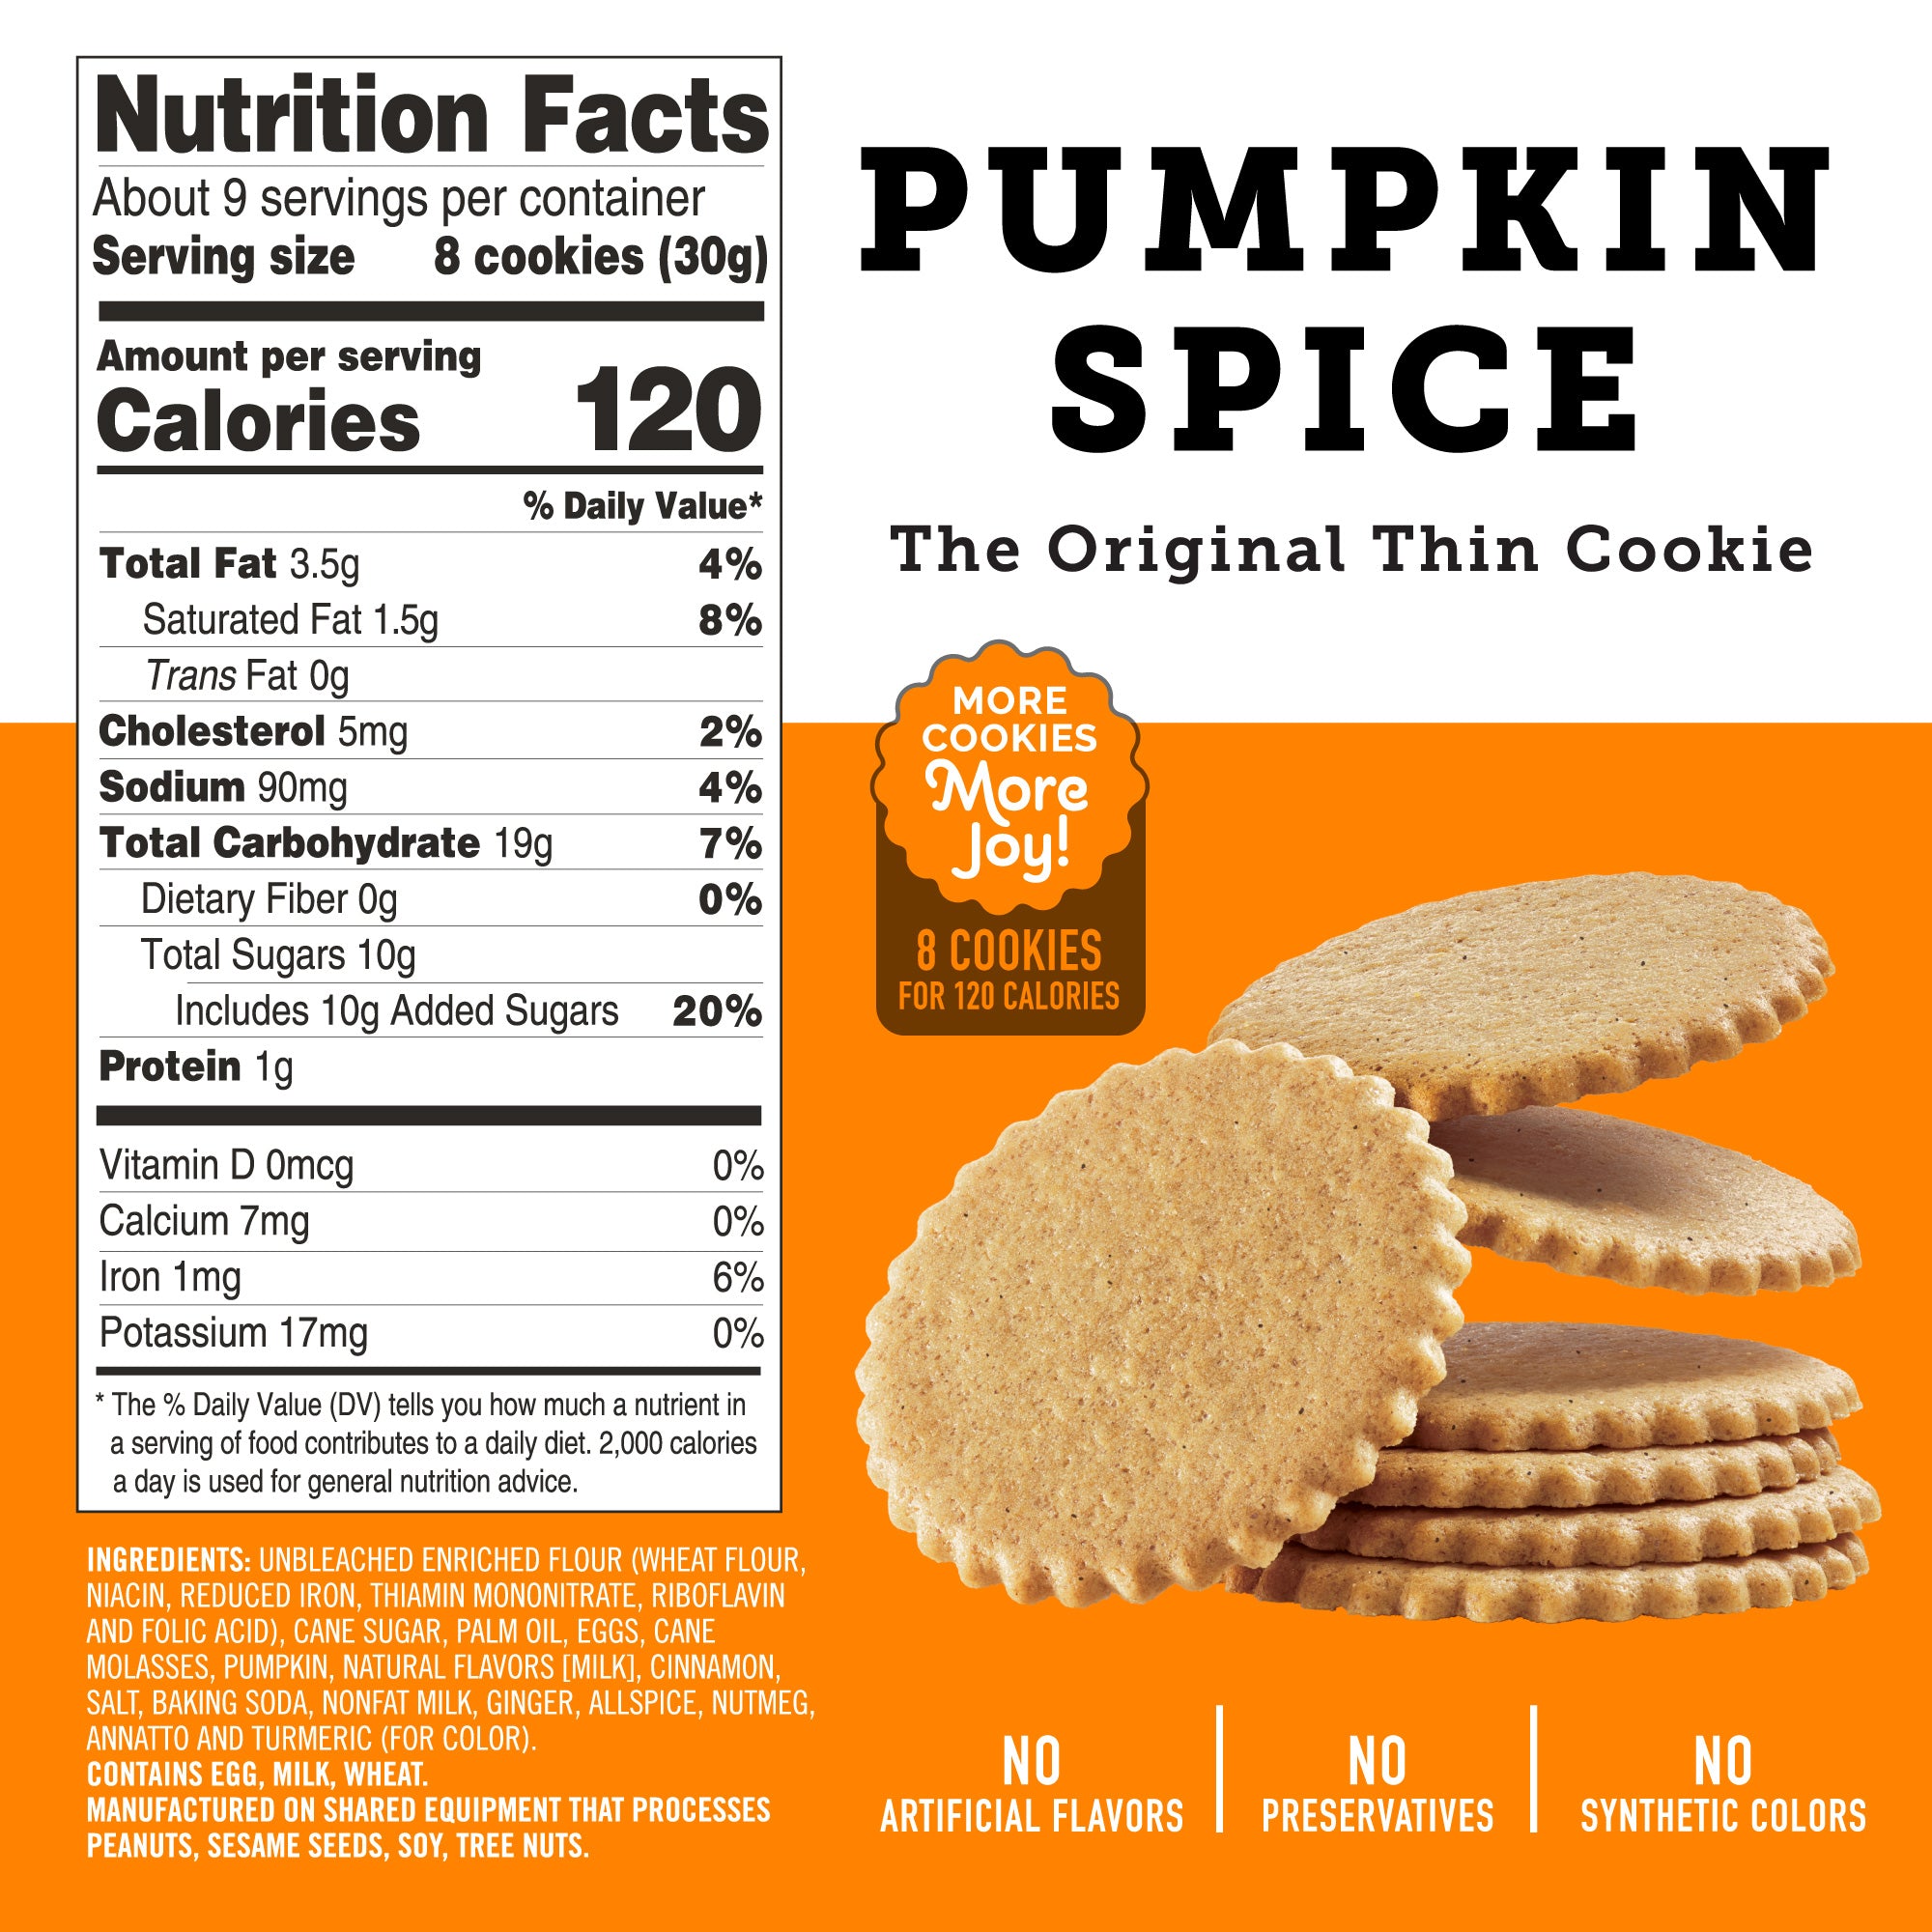 Hot Cocoa, Gingerbread, and Pumpkin Spice Cookie 3-Pack